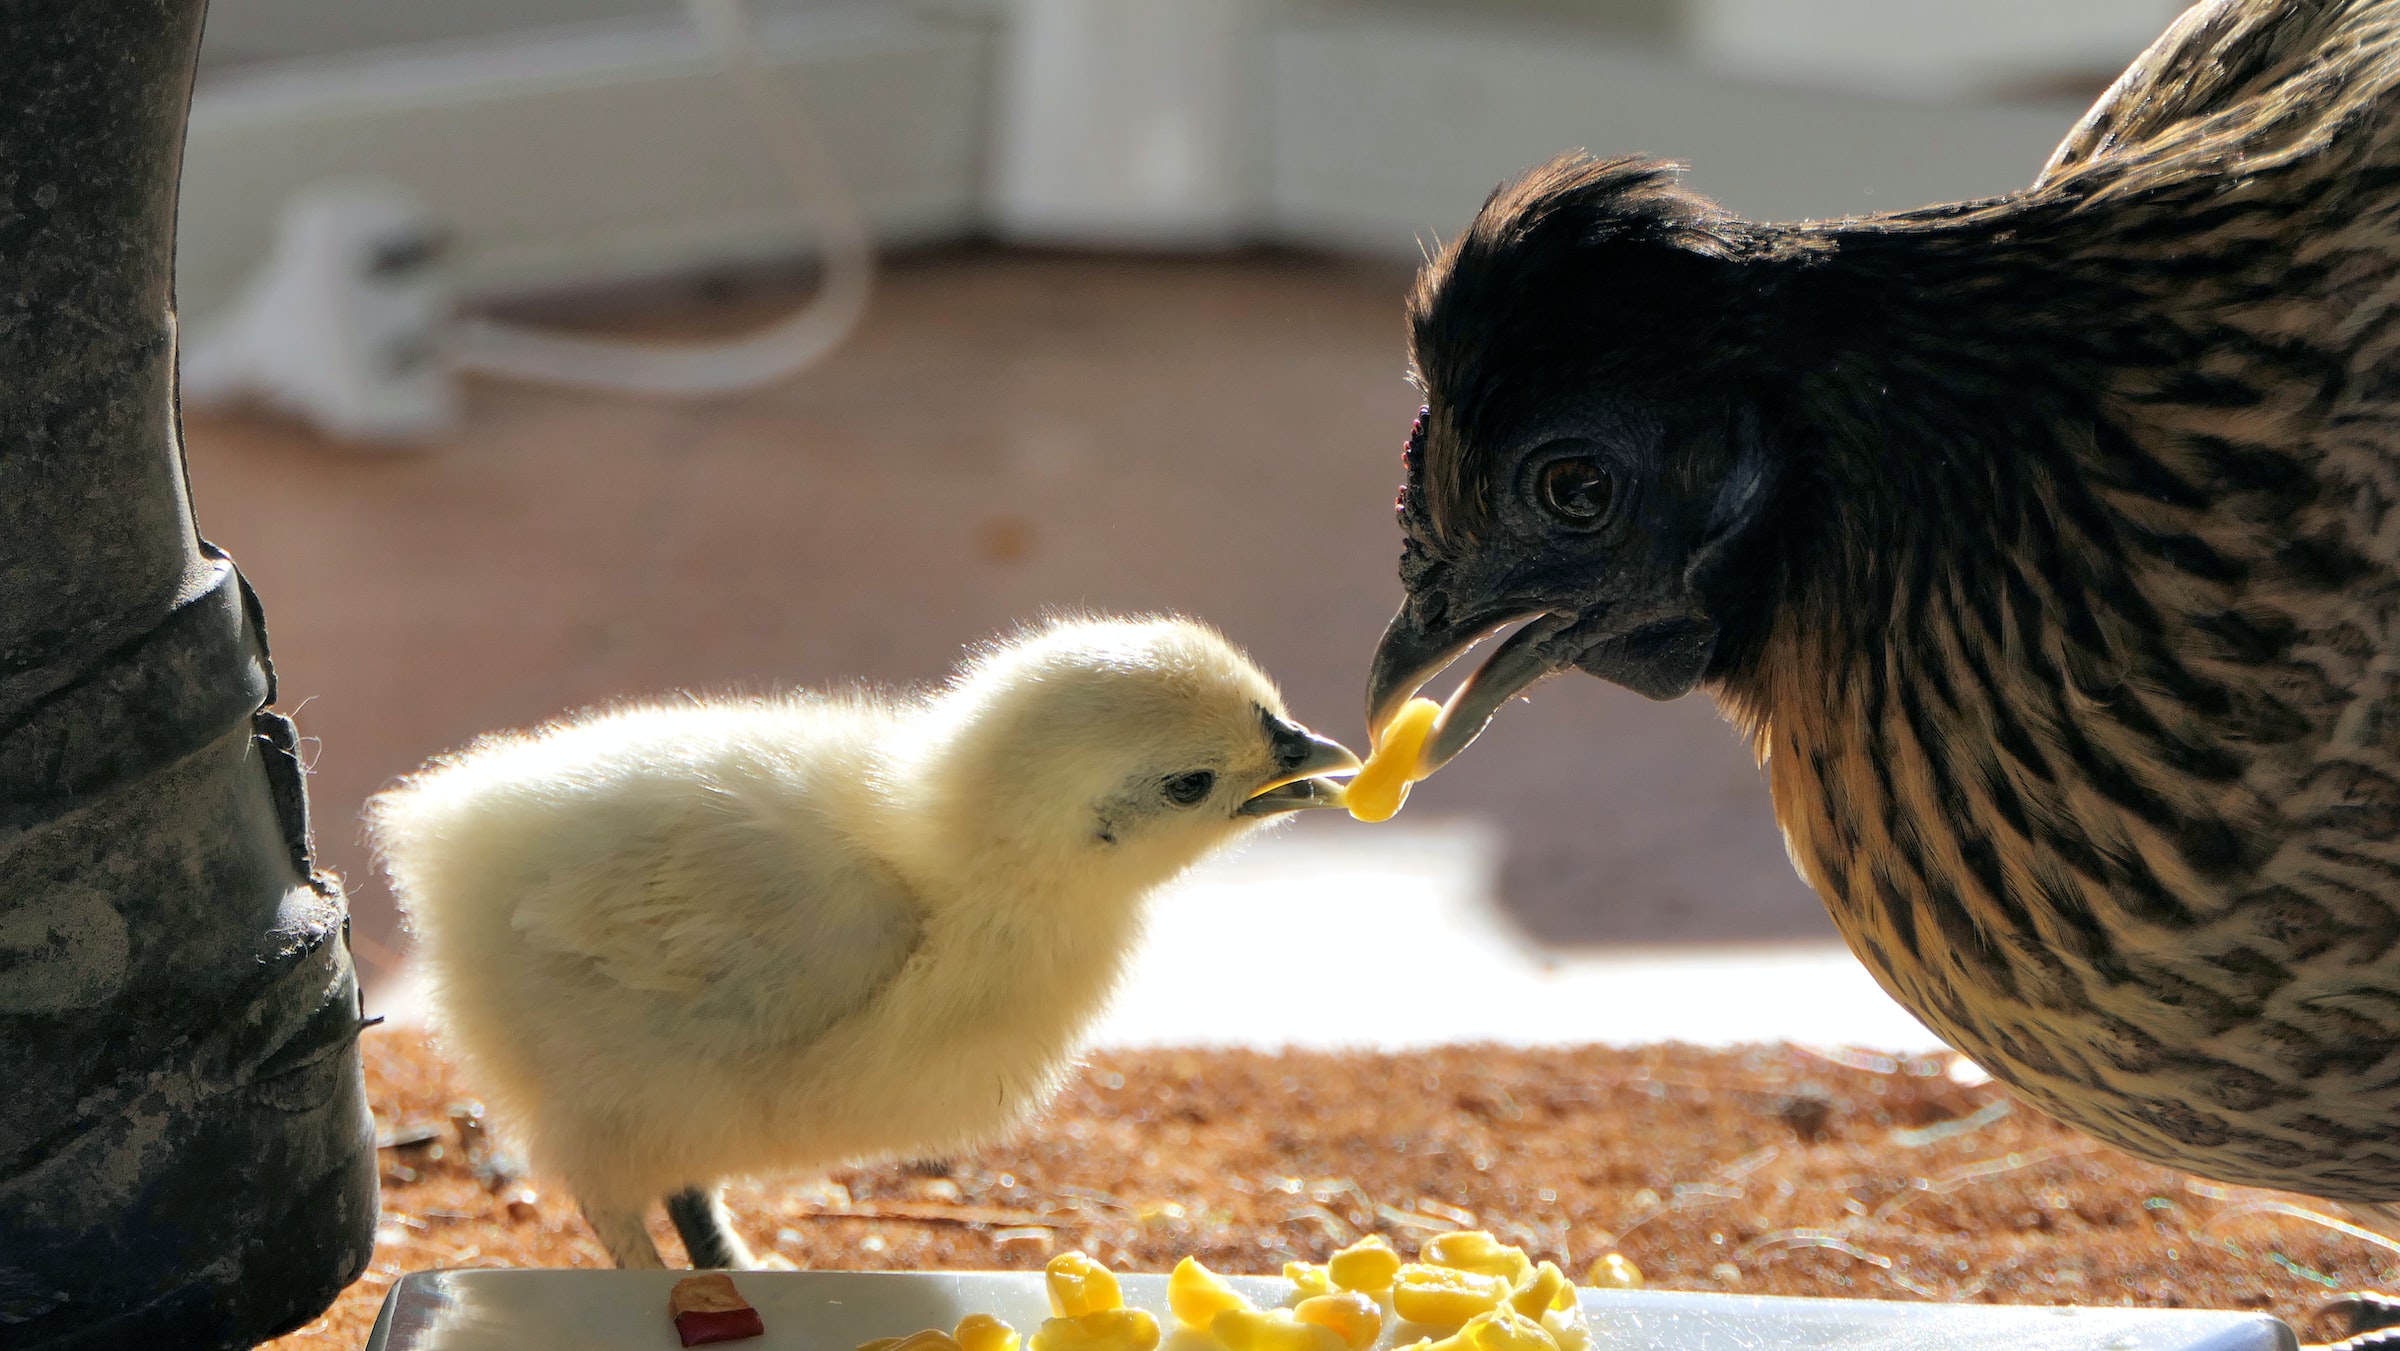 A baby chick takes food from a hen